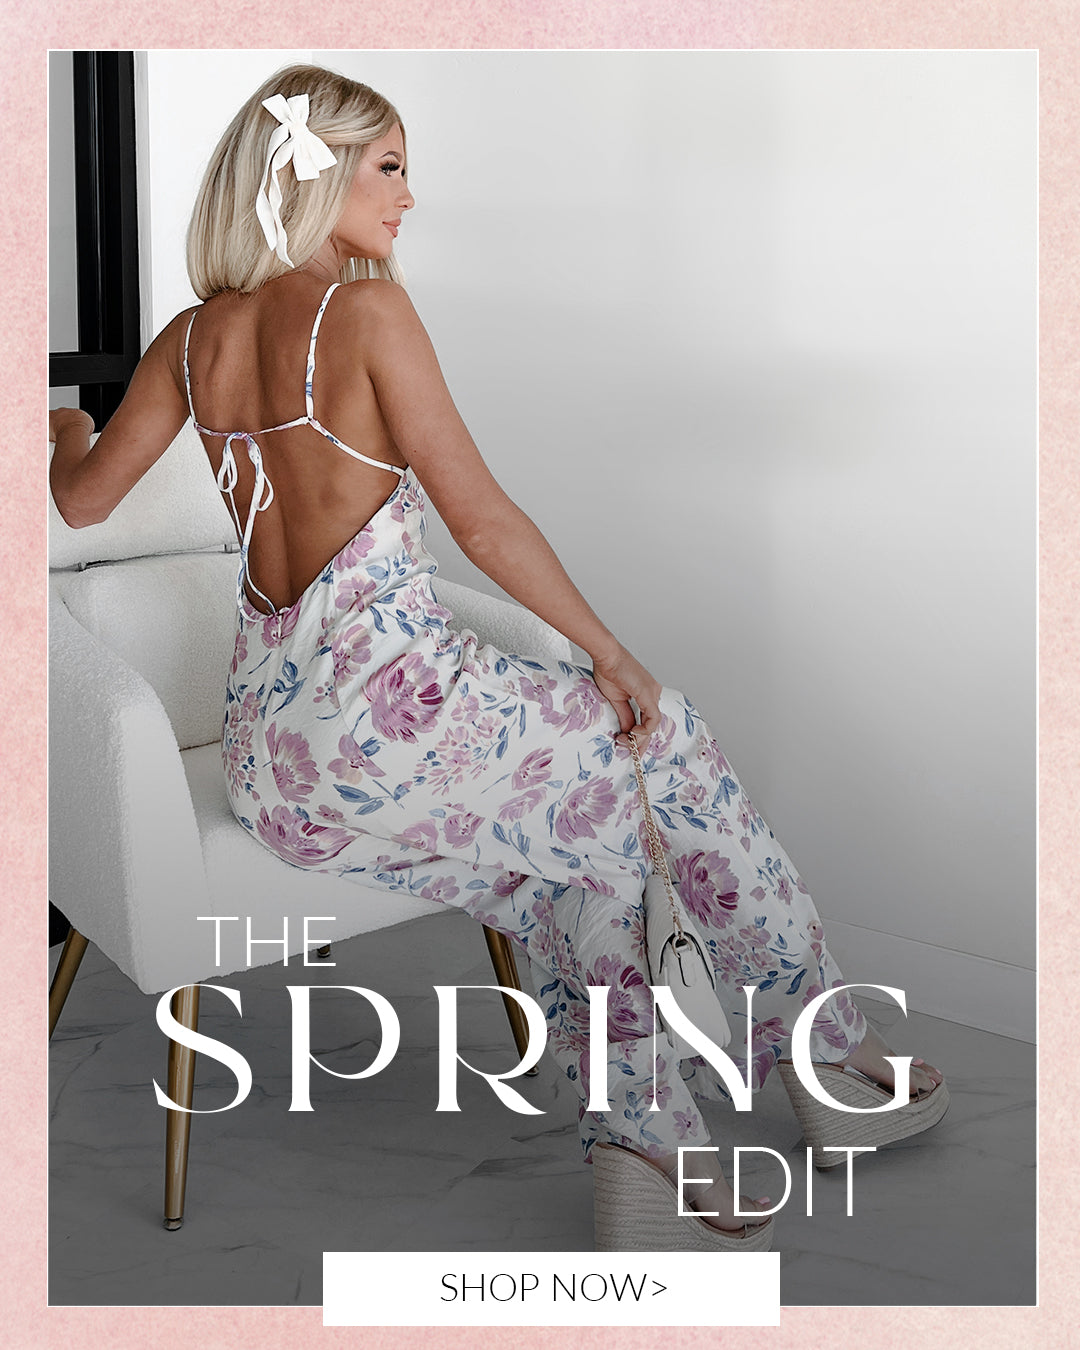 Photo of model wearing an open back jumpsuit, sitting on a chair. "the Spring edit". Call to action says shop now and links to the Spring Collection.